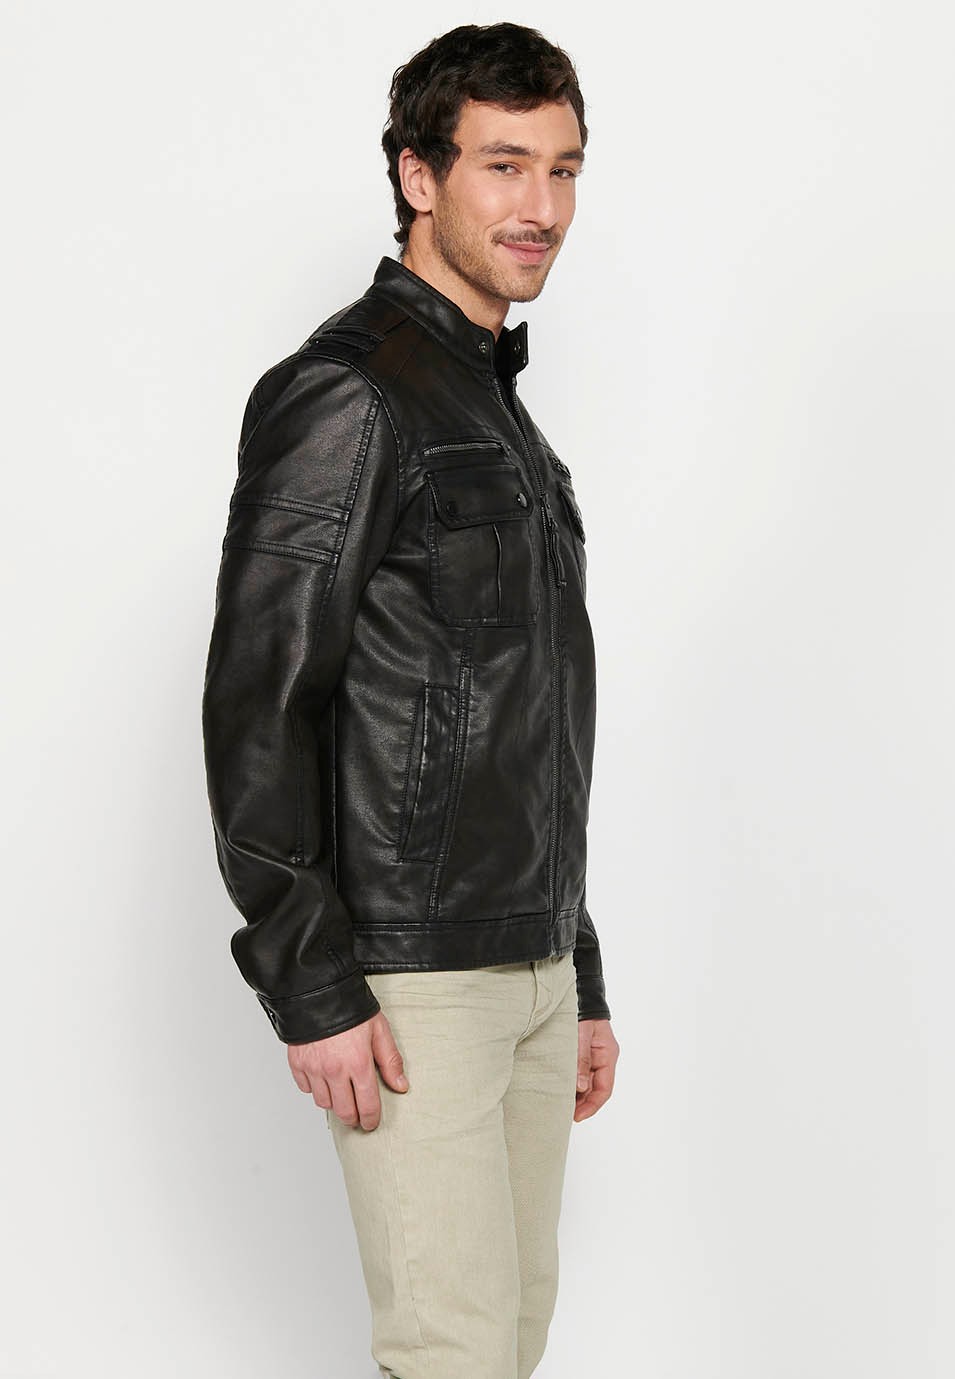 Dark Brown Leather Effect Jacket with Front Zipper Closure and Round Neck for Men 6